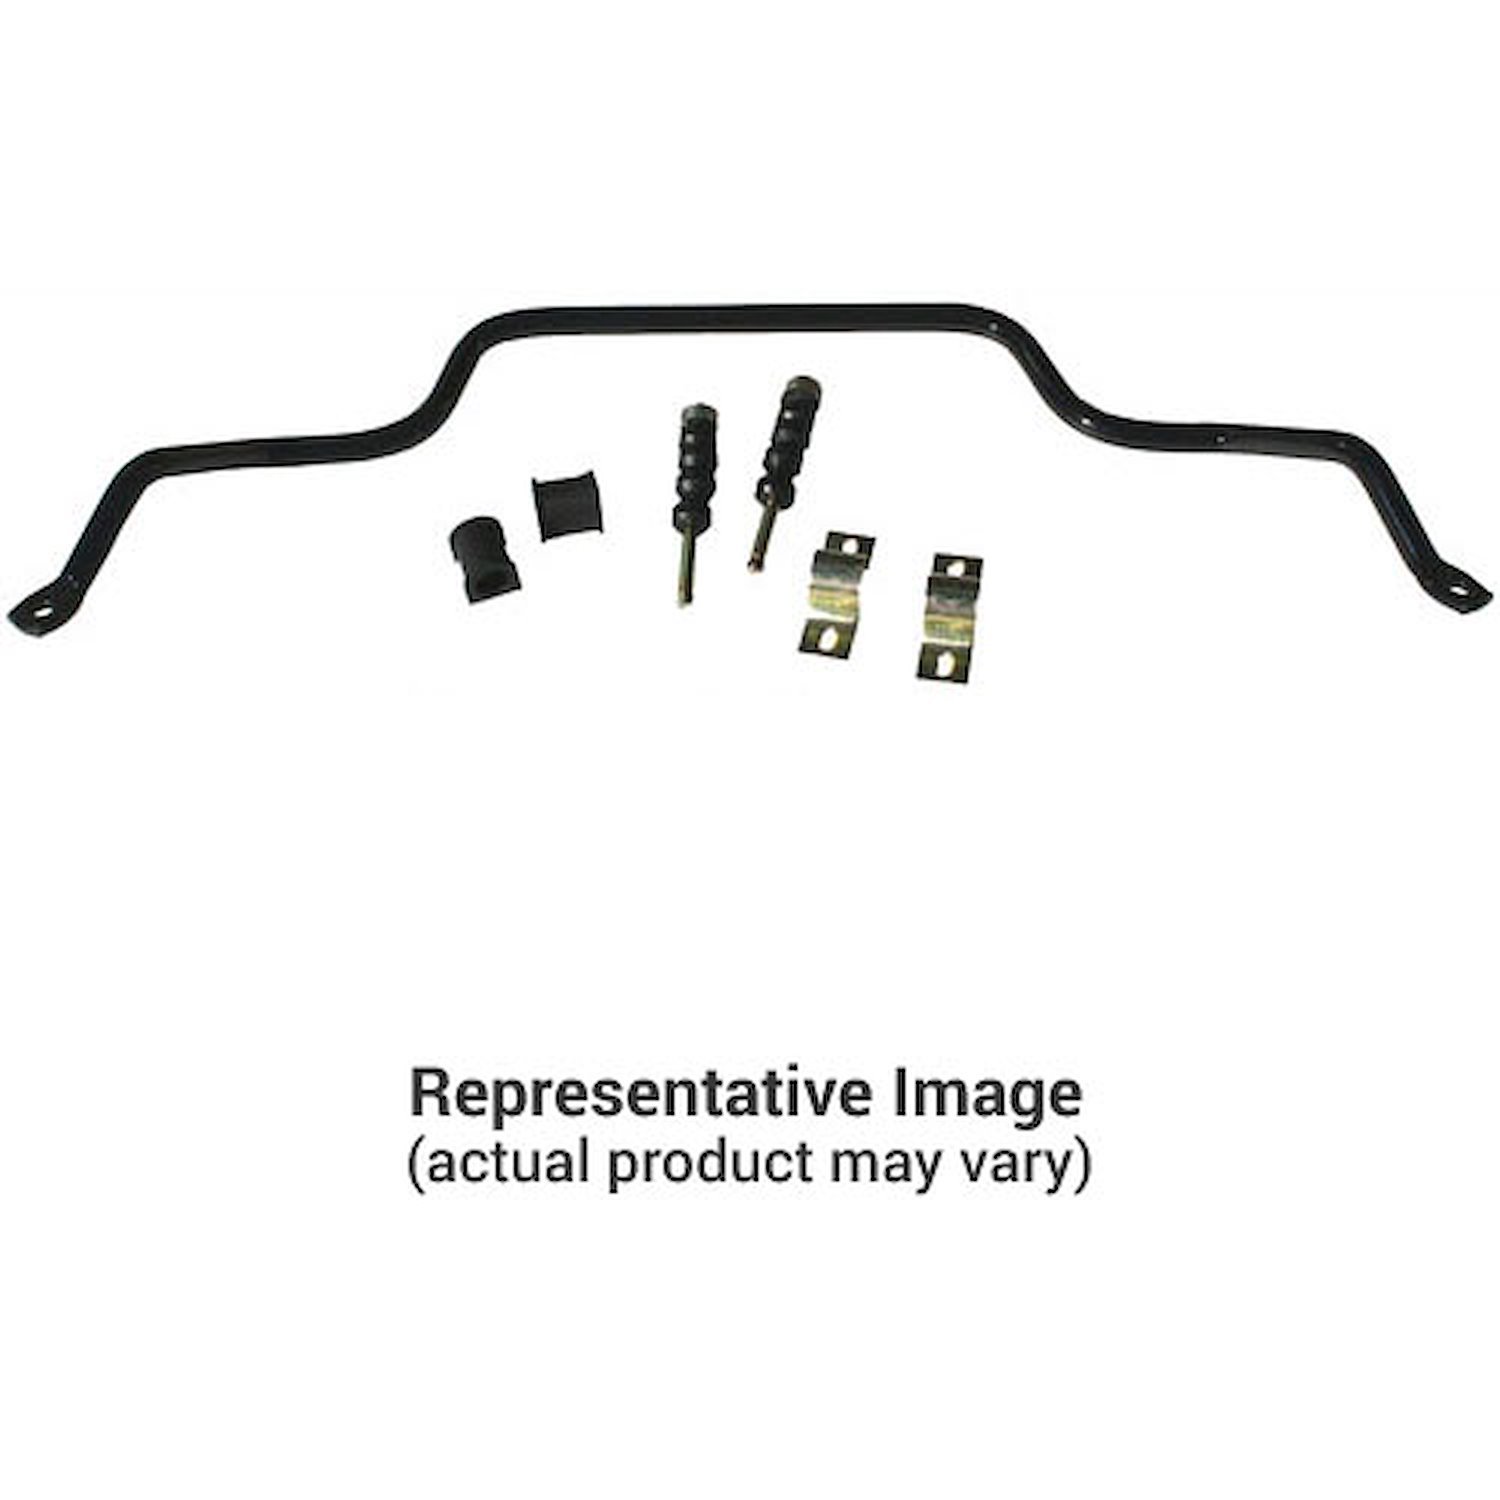 1" Front Sway Bar 1986-89 Excel